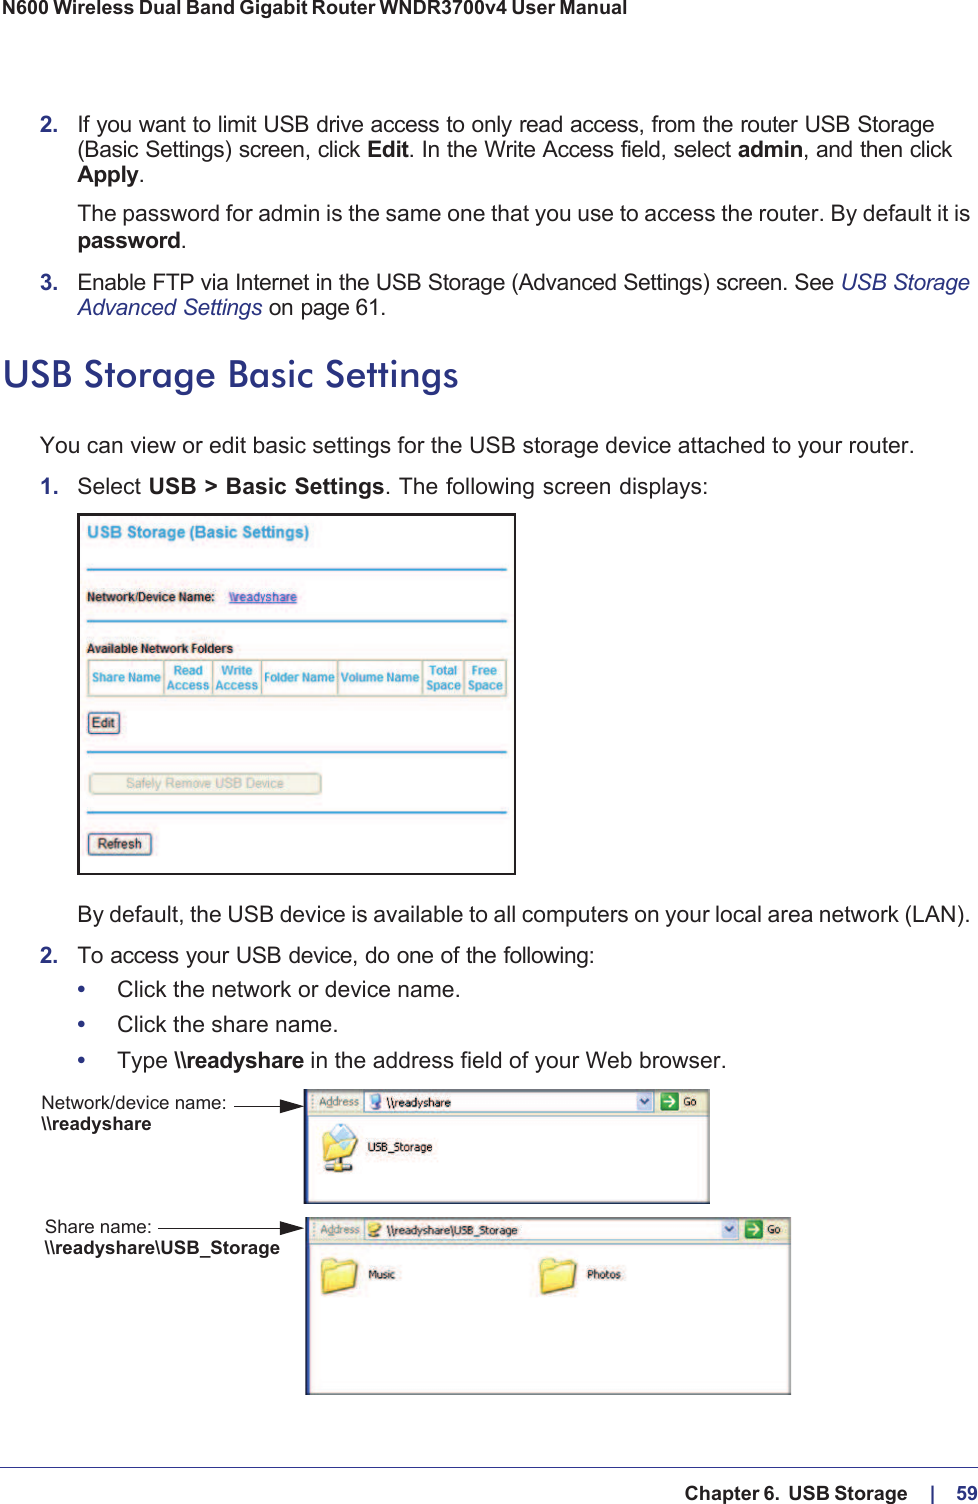   Chapter 6.  USB Storage     |    59N600 Wireless Dual Band Gigabit Router WNDR3700v4 User Manual 2. If you want to limit USB drive access to only read access, from the router USB Storage (Basic Settings) screen, click Edit. In the Write Access field, select admin, and then click Apply.The password for admin is the same one that you use to access the router. By default it is password.3. Enable FTP via Internet in the USB Storage (Advanced Settings) screen. See USB Storage Advanced Settings on page  61.USB Storage Basic SettingsYou can view or edit basic settings for the USB storage device attached to your router. 1. Select USB &gt; Basic Settings. The following screen displays:By default, the USB device is available to all computers on your local area network (LAN). 2. To access your USB device, do one of the following:•Click the network or device name.•Click the share name.•Type \\readyshare in the address field of your Web browser.Network/device name:Share name:\\readyshare\\readyshare\USB_Storage